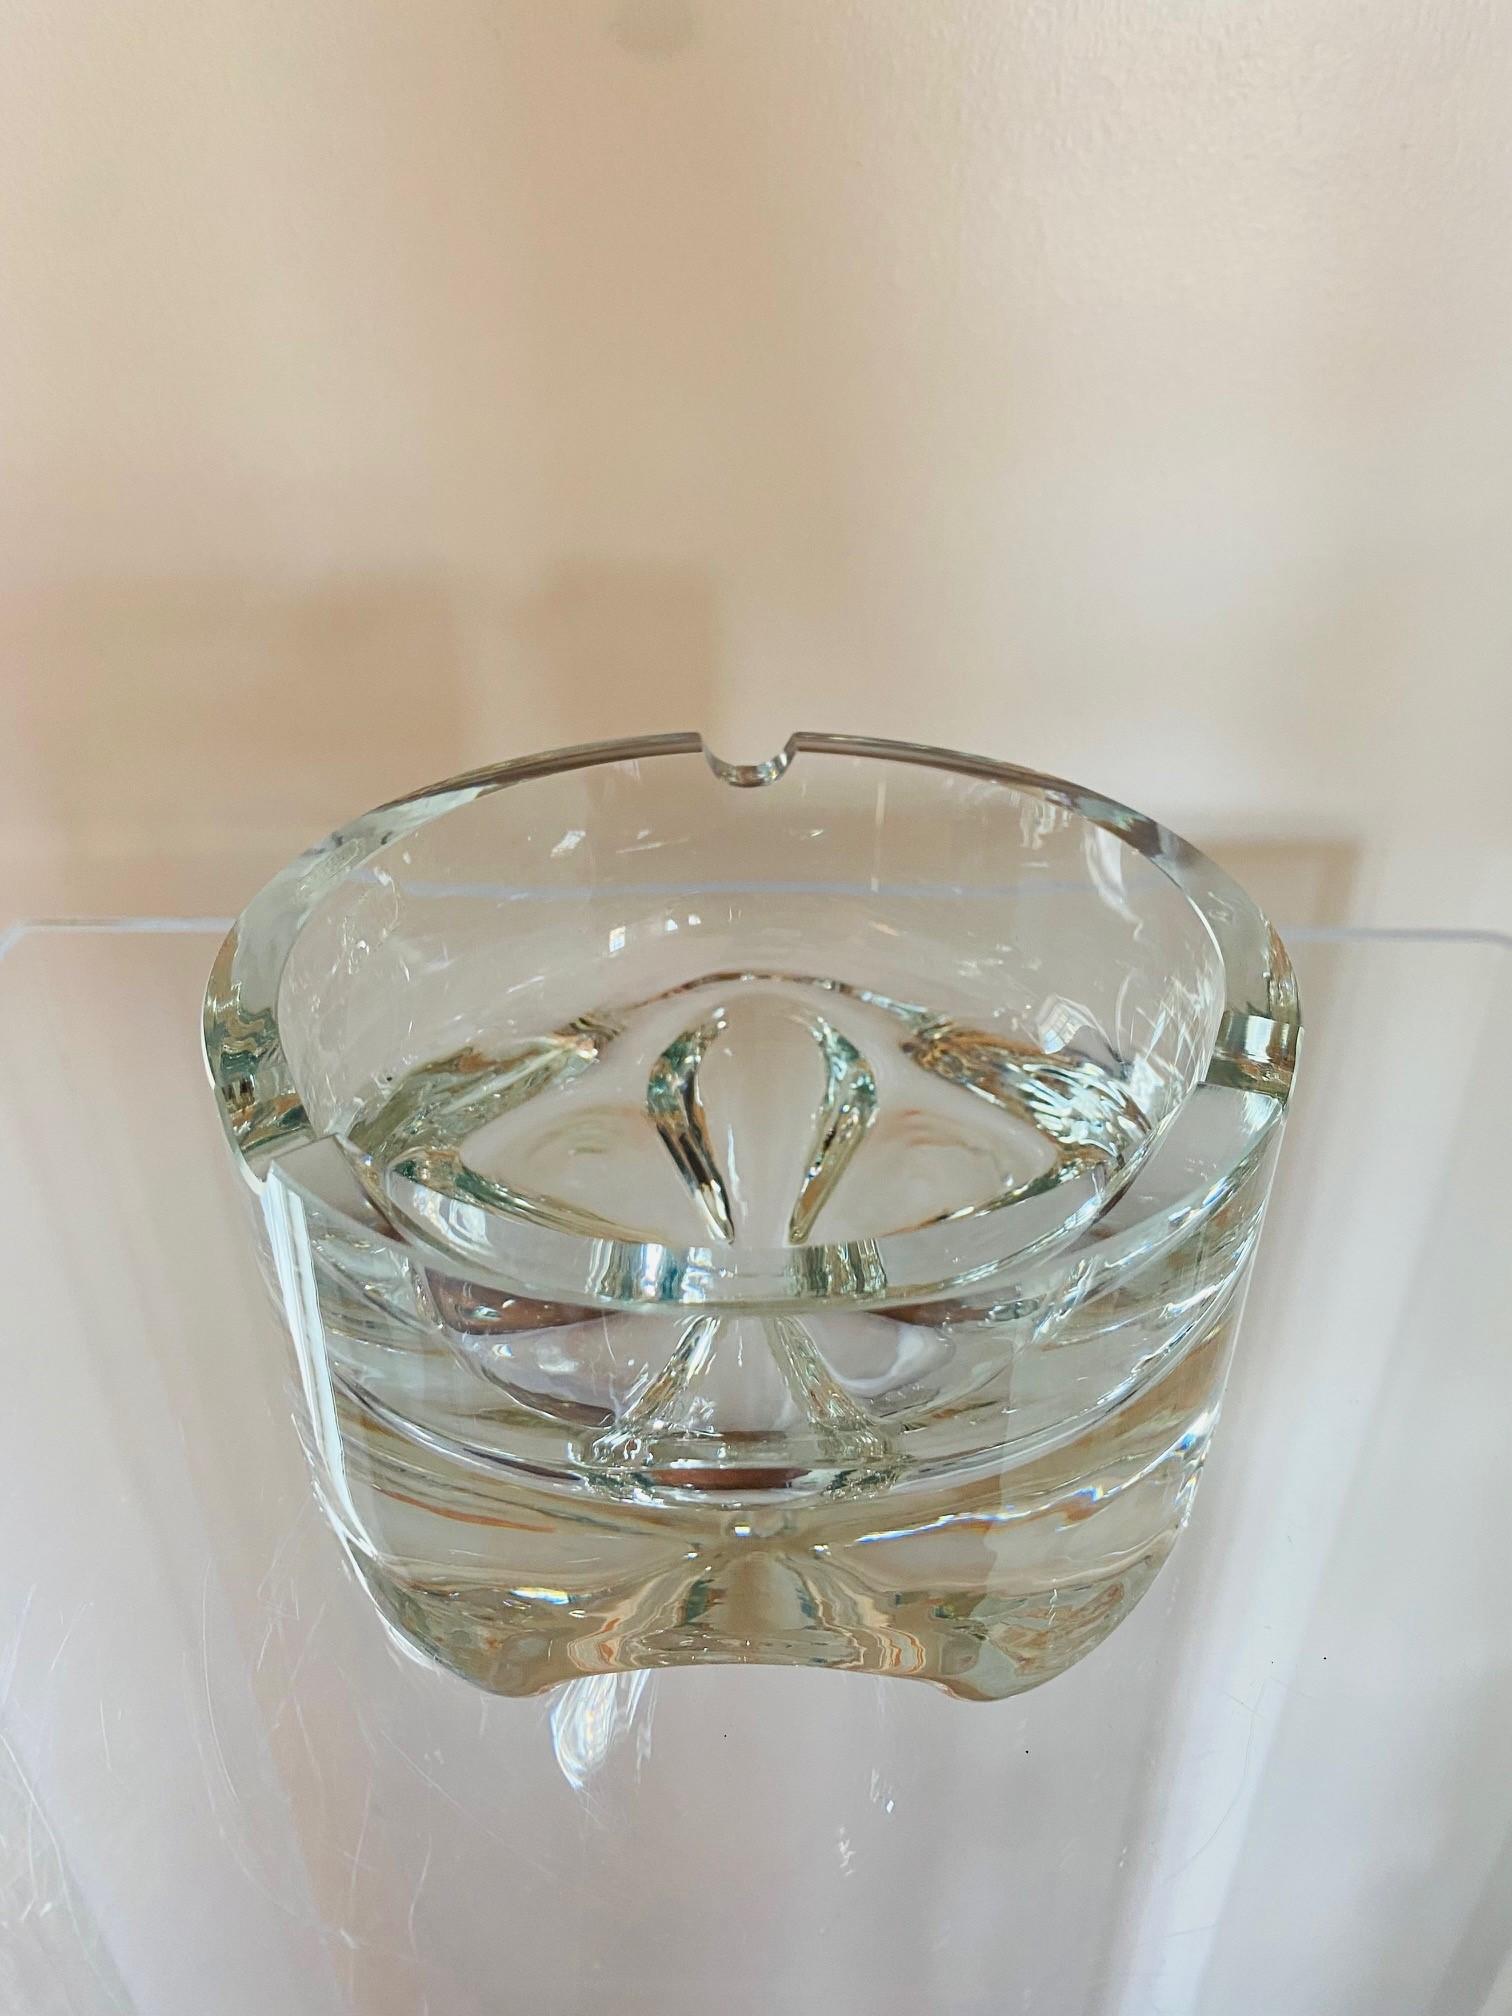 Mid-20th Century Vintage Mid-Century Lead Crystal Ashtray Bowl Made in Poland For Sale